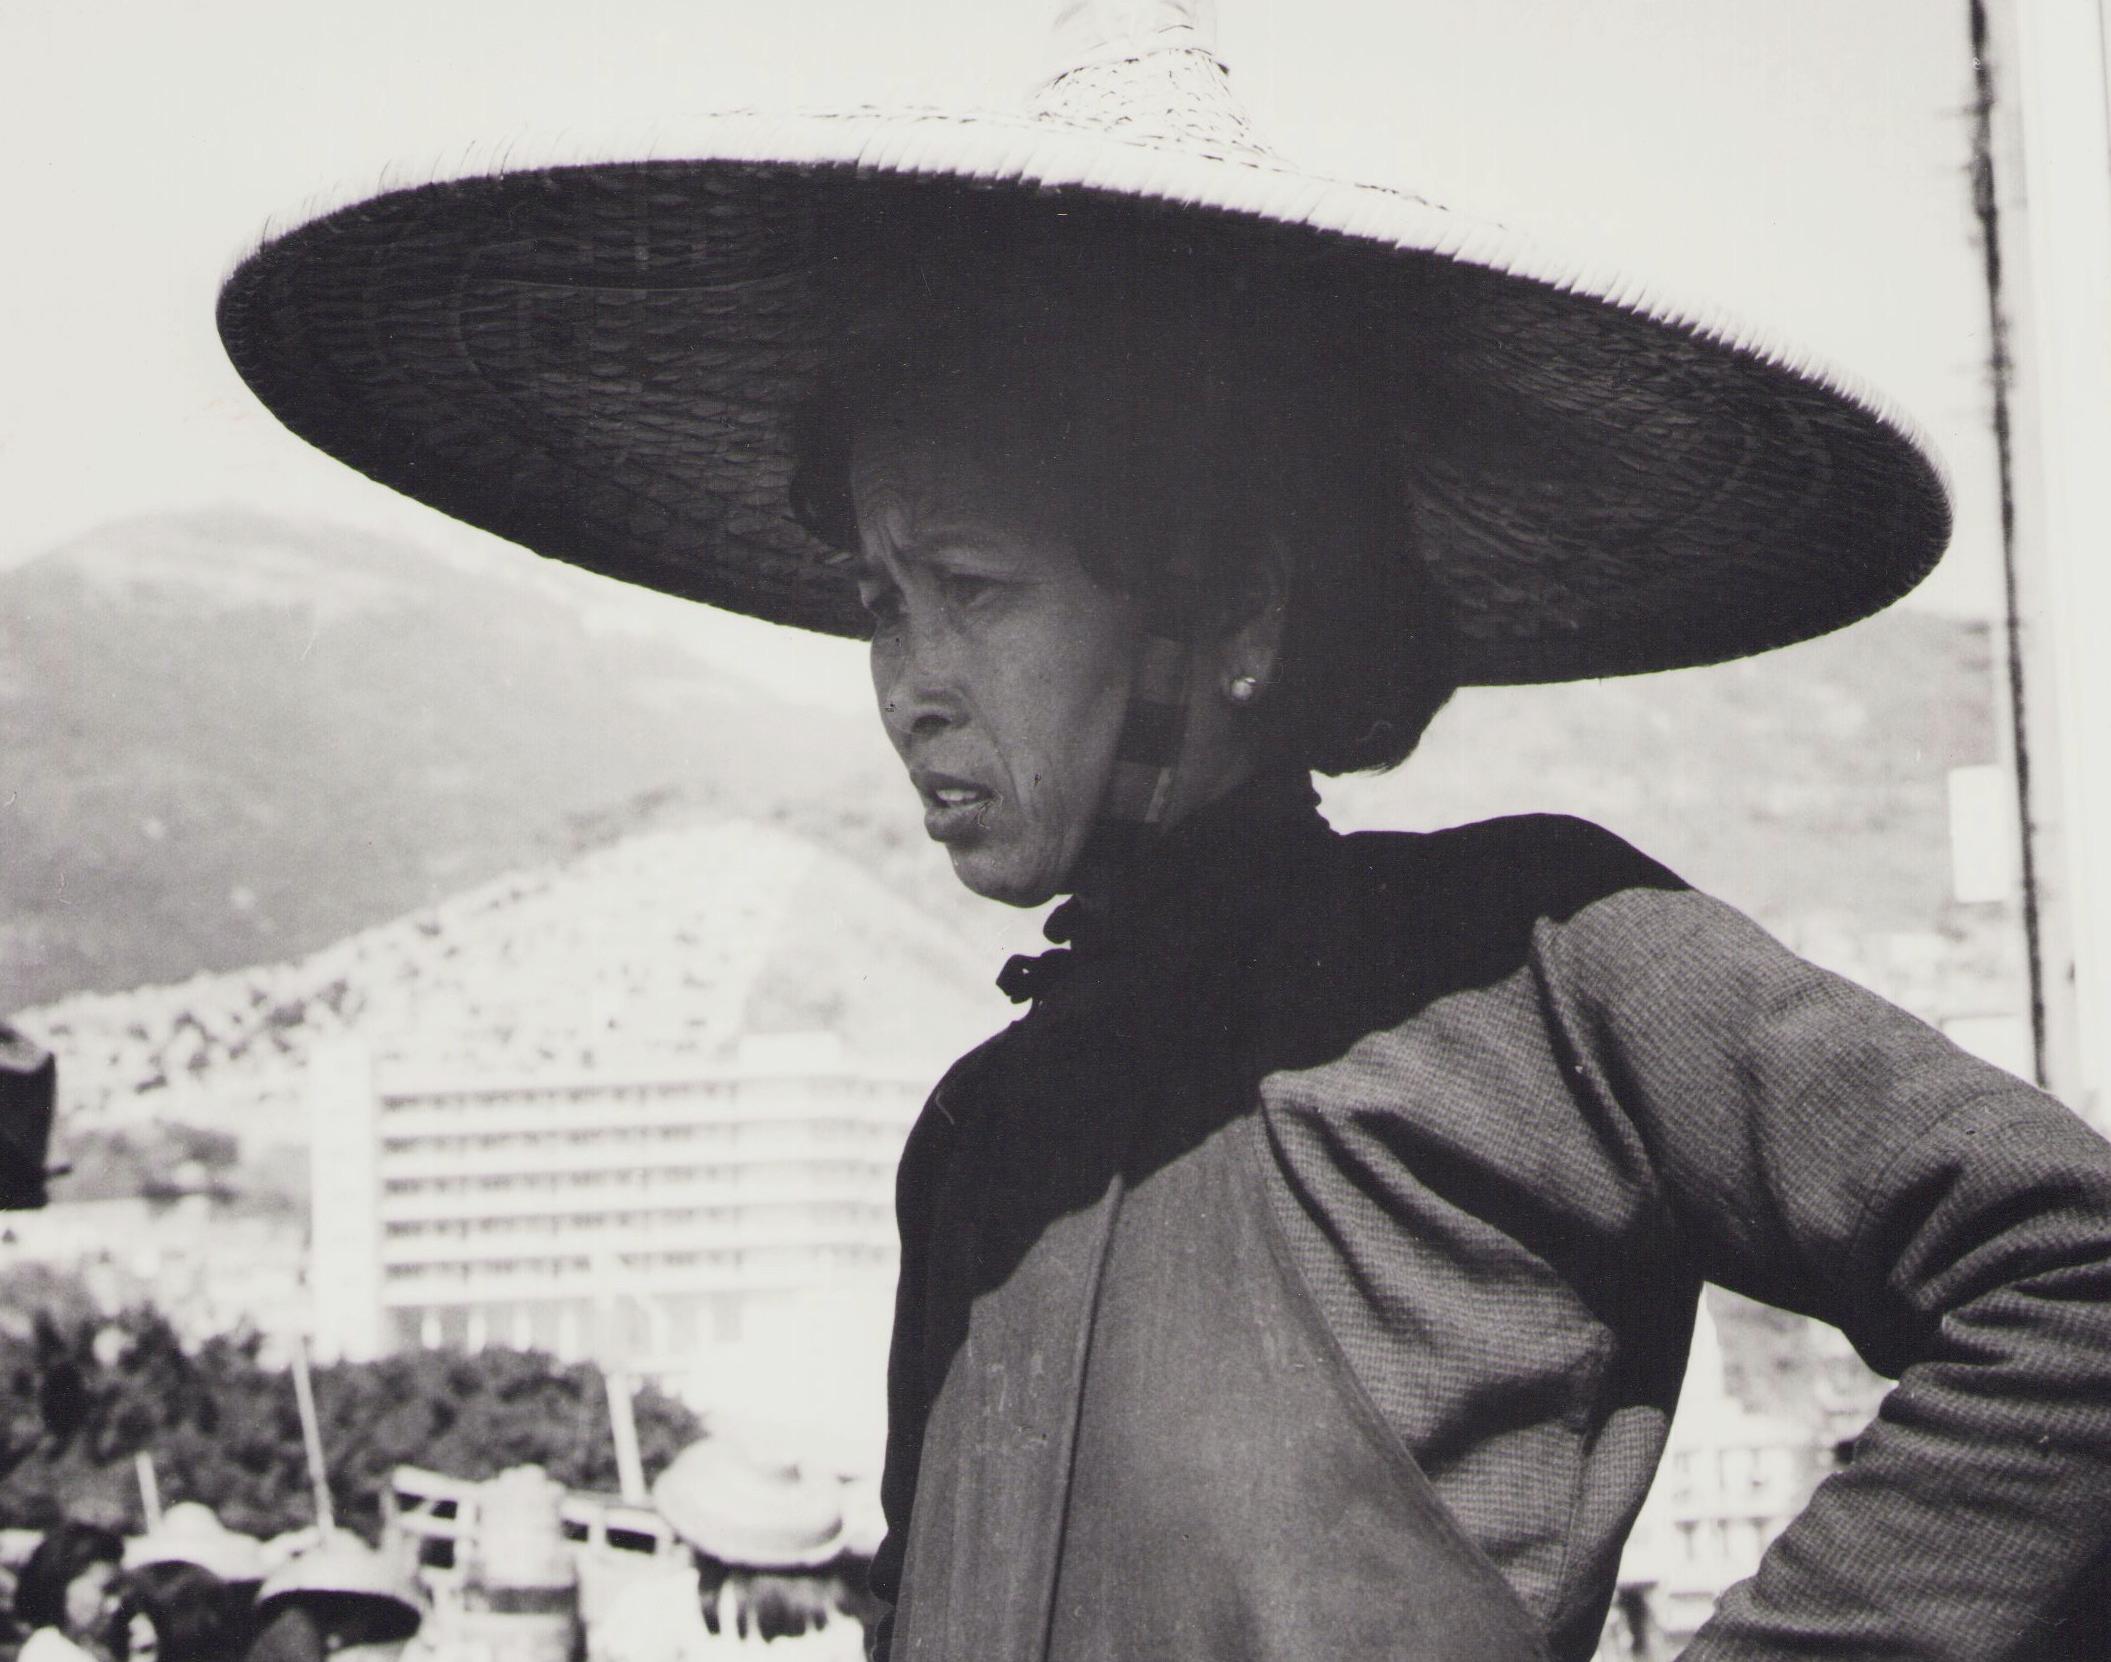 Hong Kong, Woman, Street, Black and White Photography, 1960s, 24 x 24 cm - Gray Portrait Photograph by Hanna Seidel